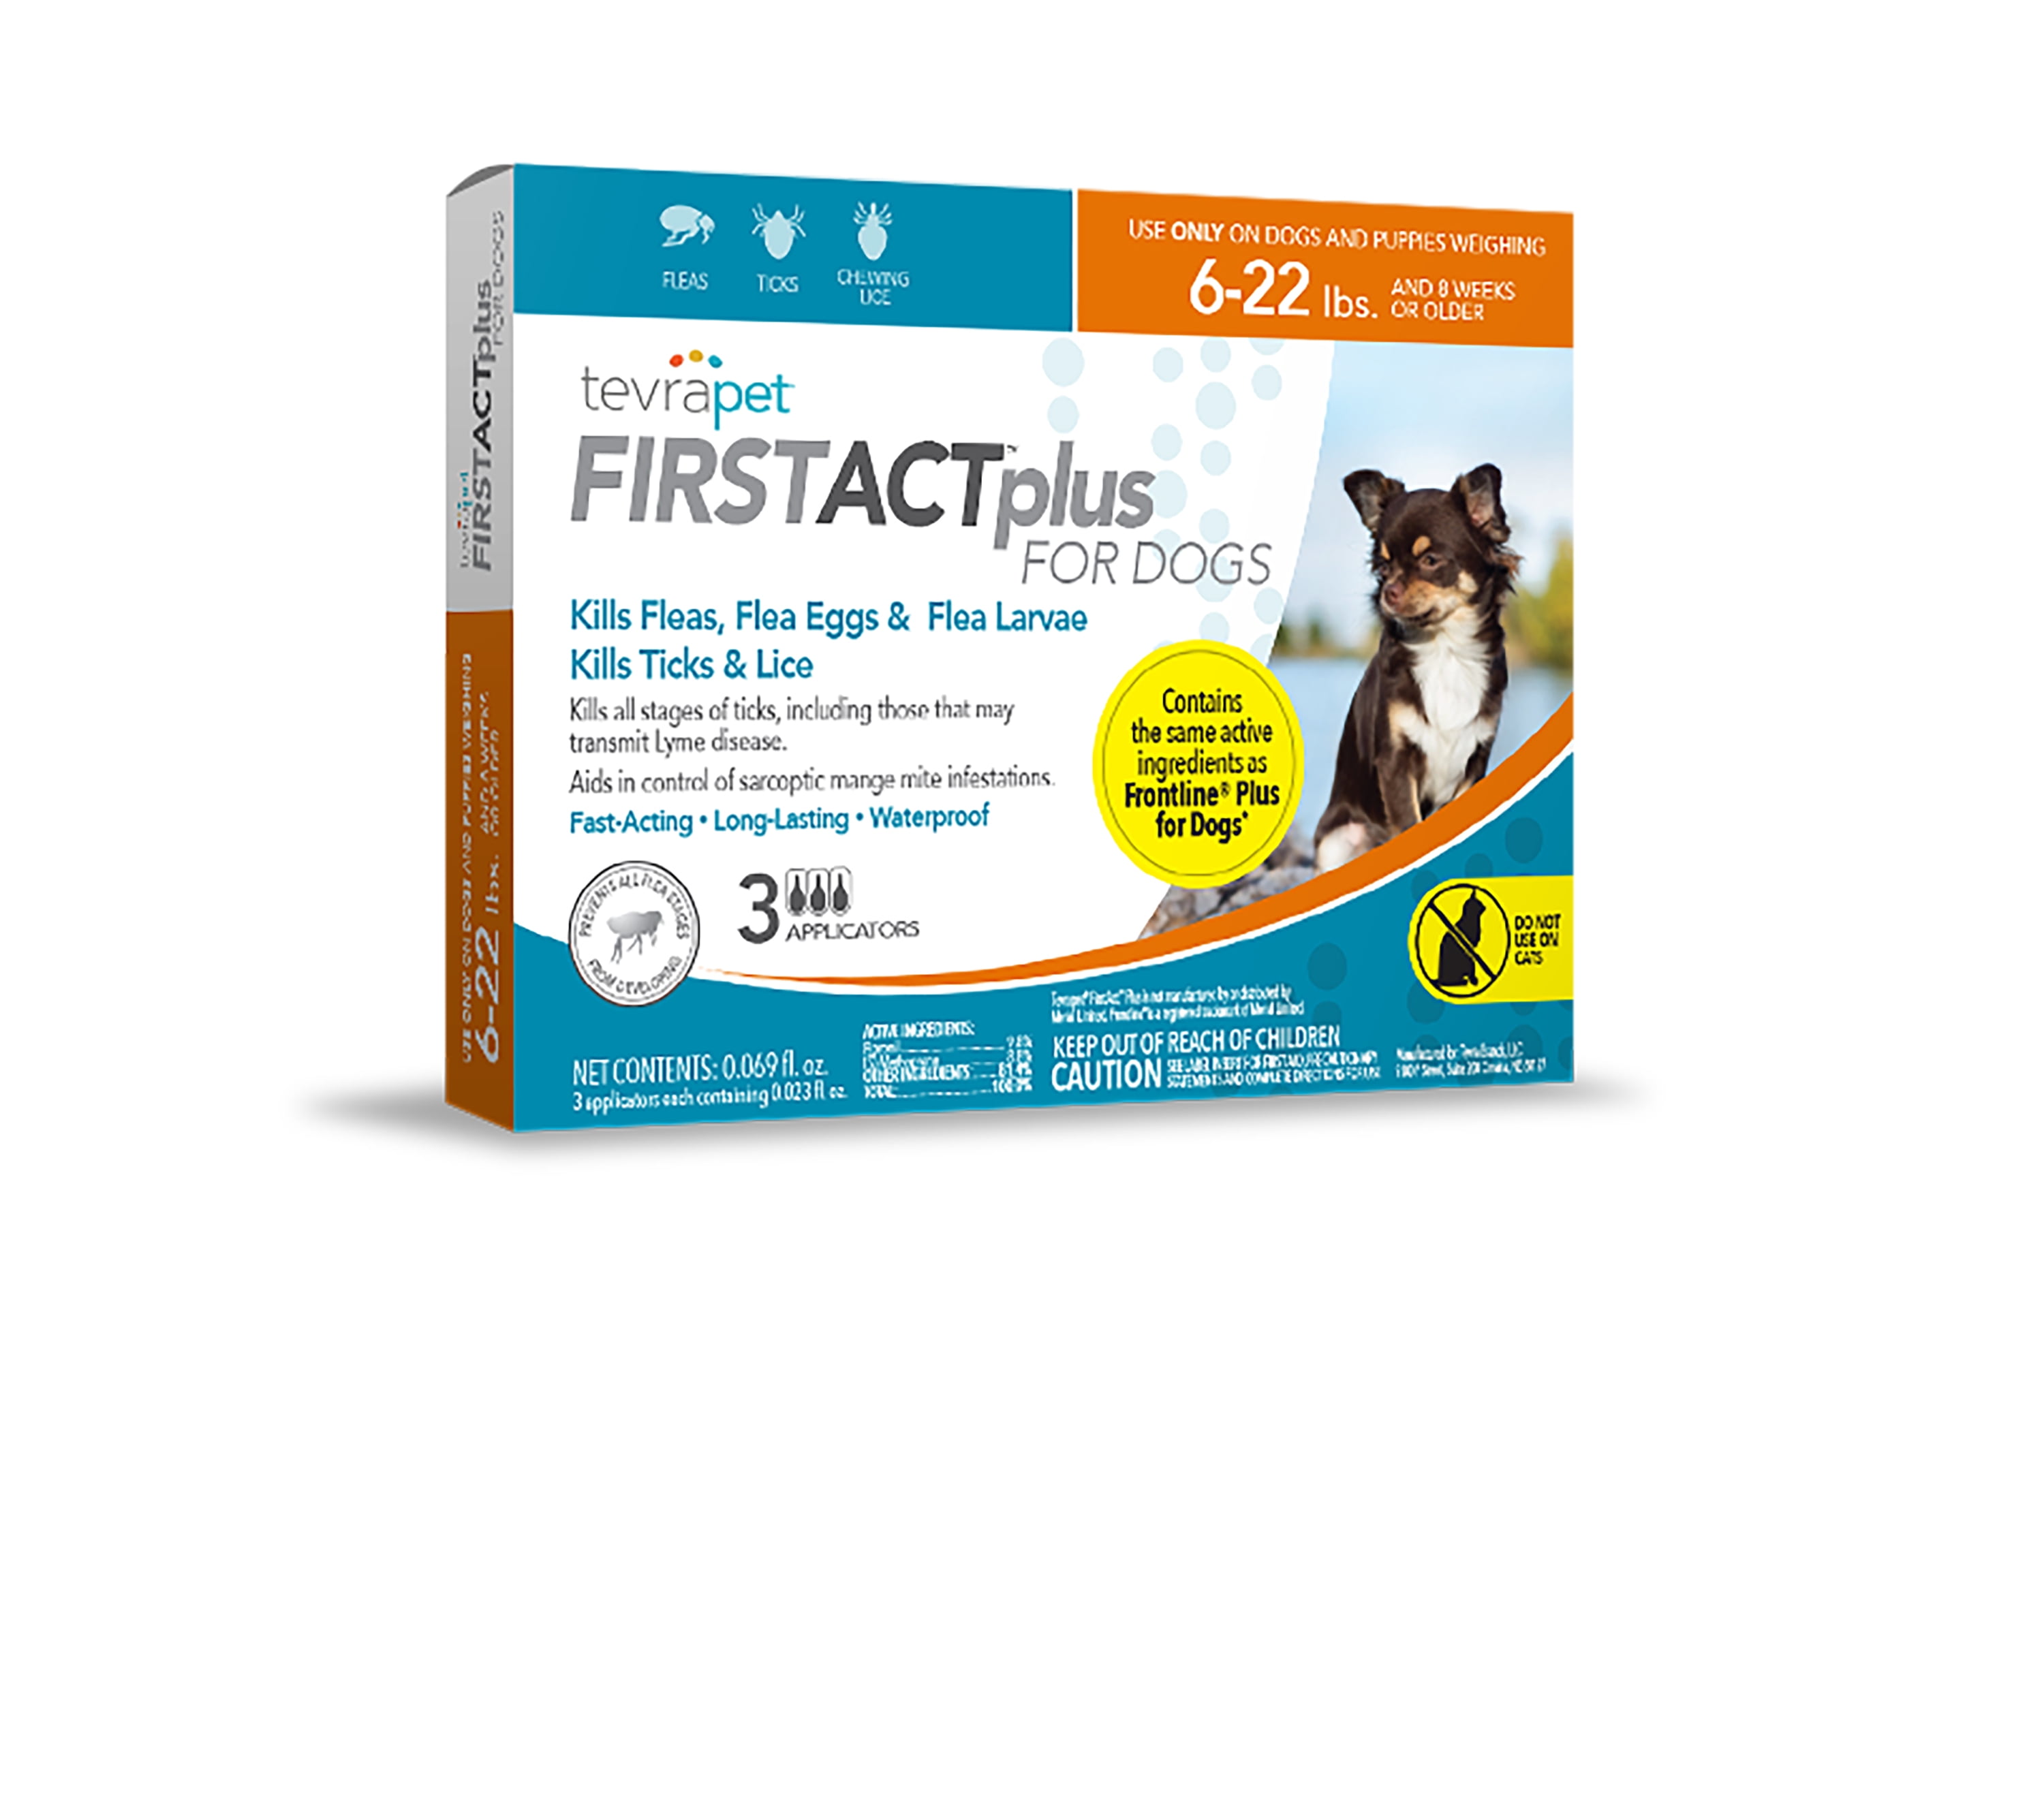 PetArmor Plus Flea and Tick Prevention for Dogs  Dog Flea and Tick Treatment  Waterproof Topical  Fast Acting  X-Large Dogs (89-132 lbs)  Doses